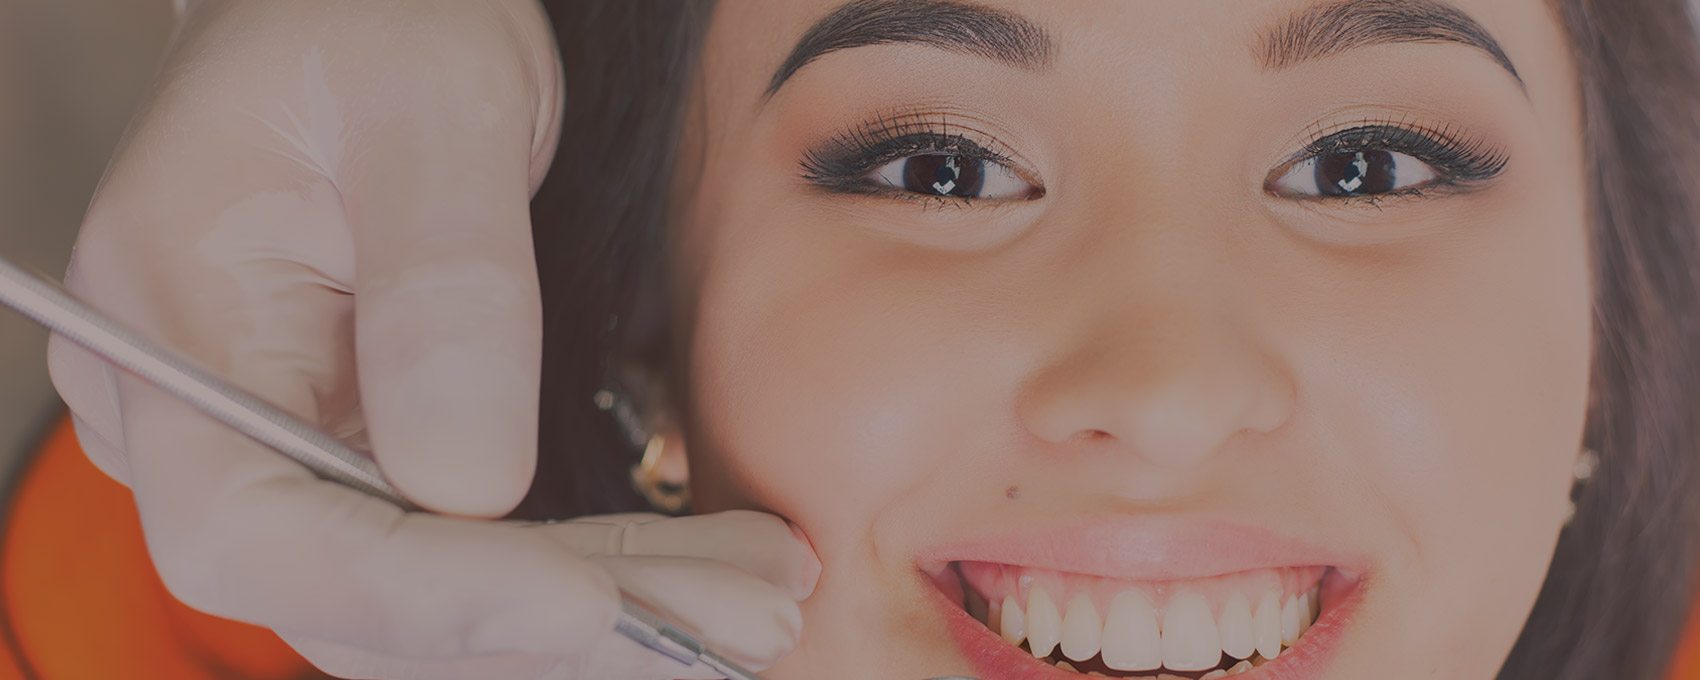 Tooth Extractions - Westlake Family Dentistry